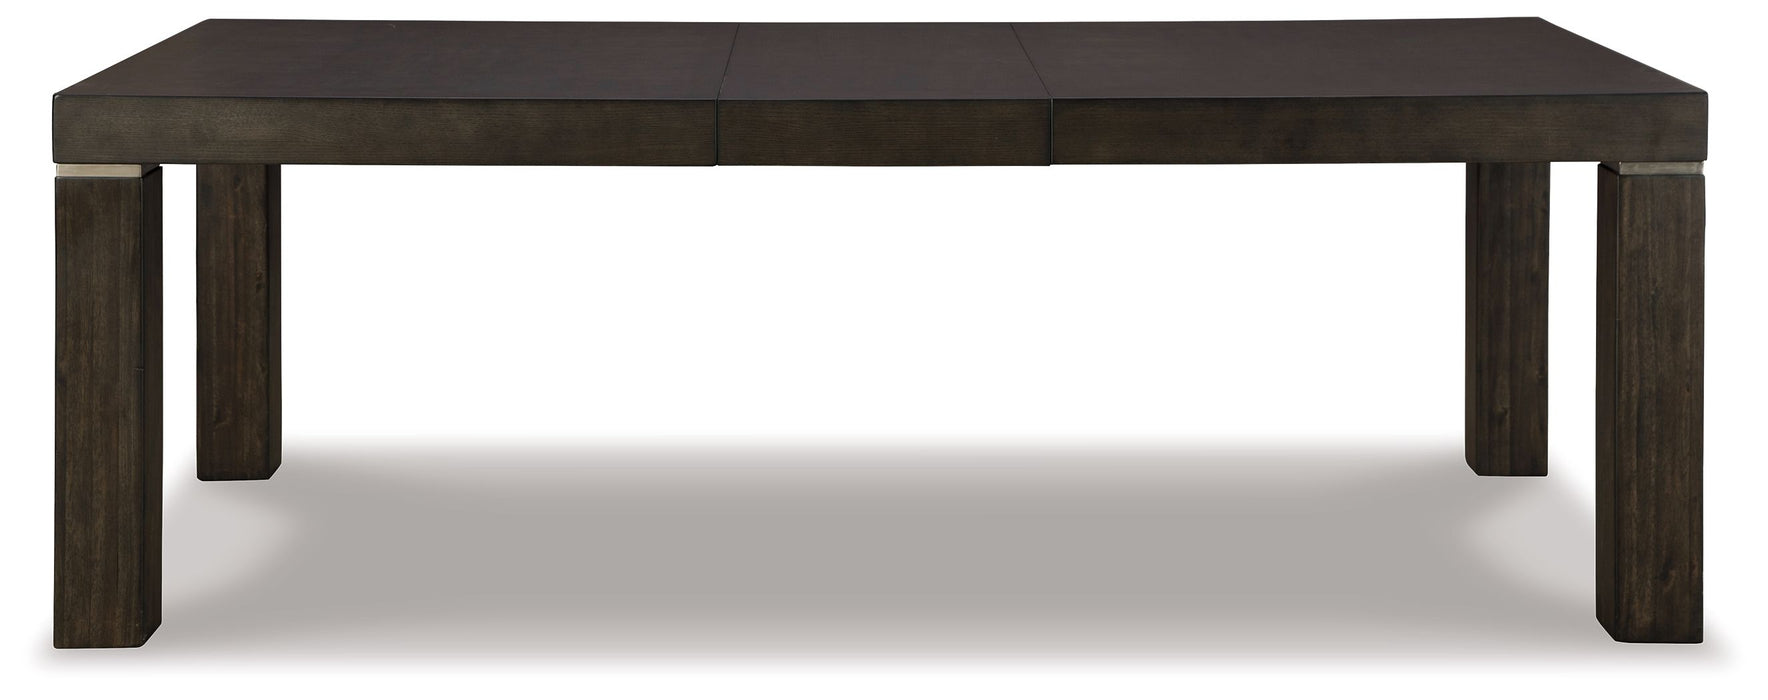 Hyndell - Dark Brown - Rect Dining Room Ext Table